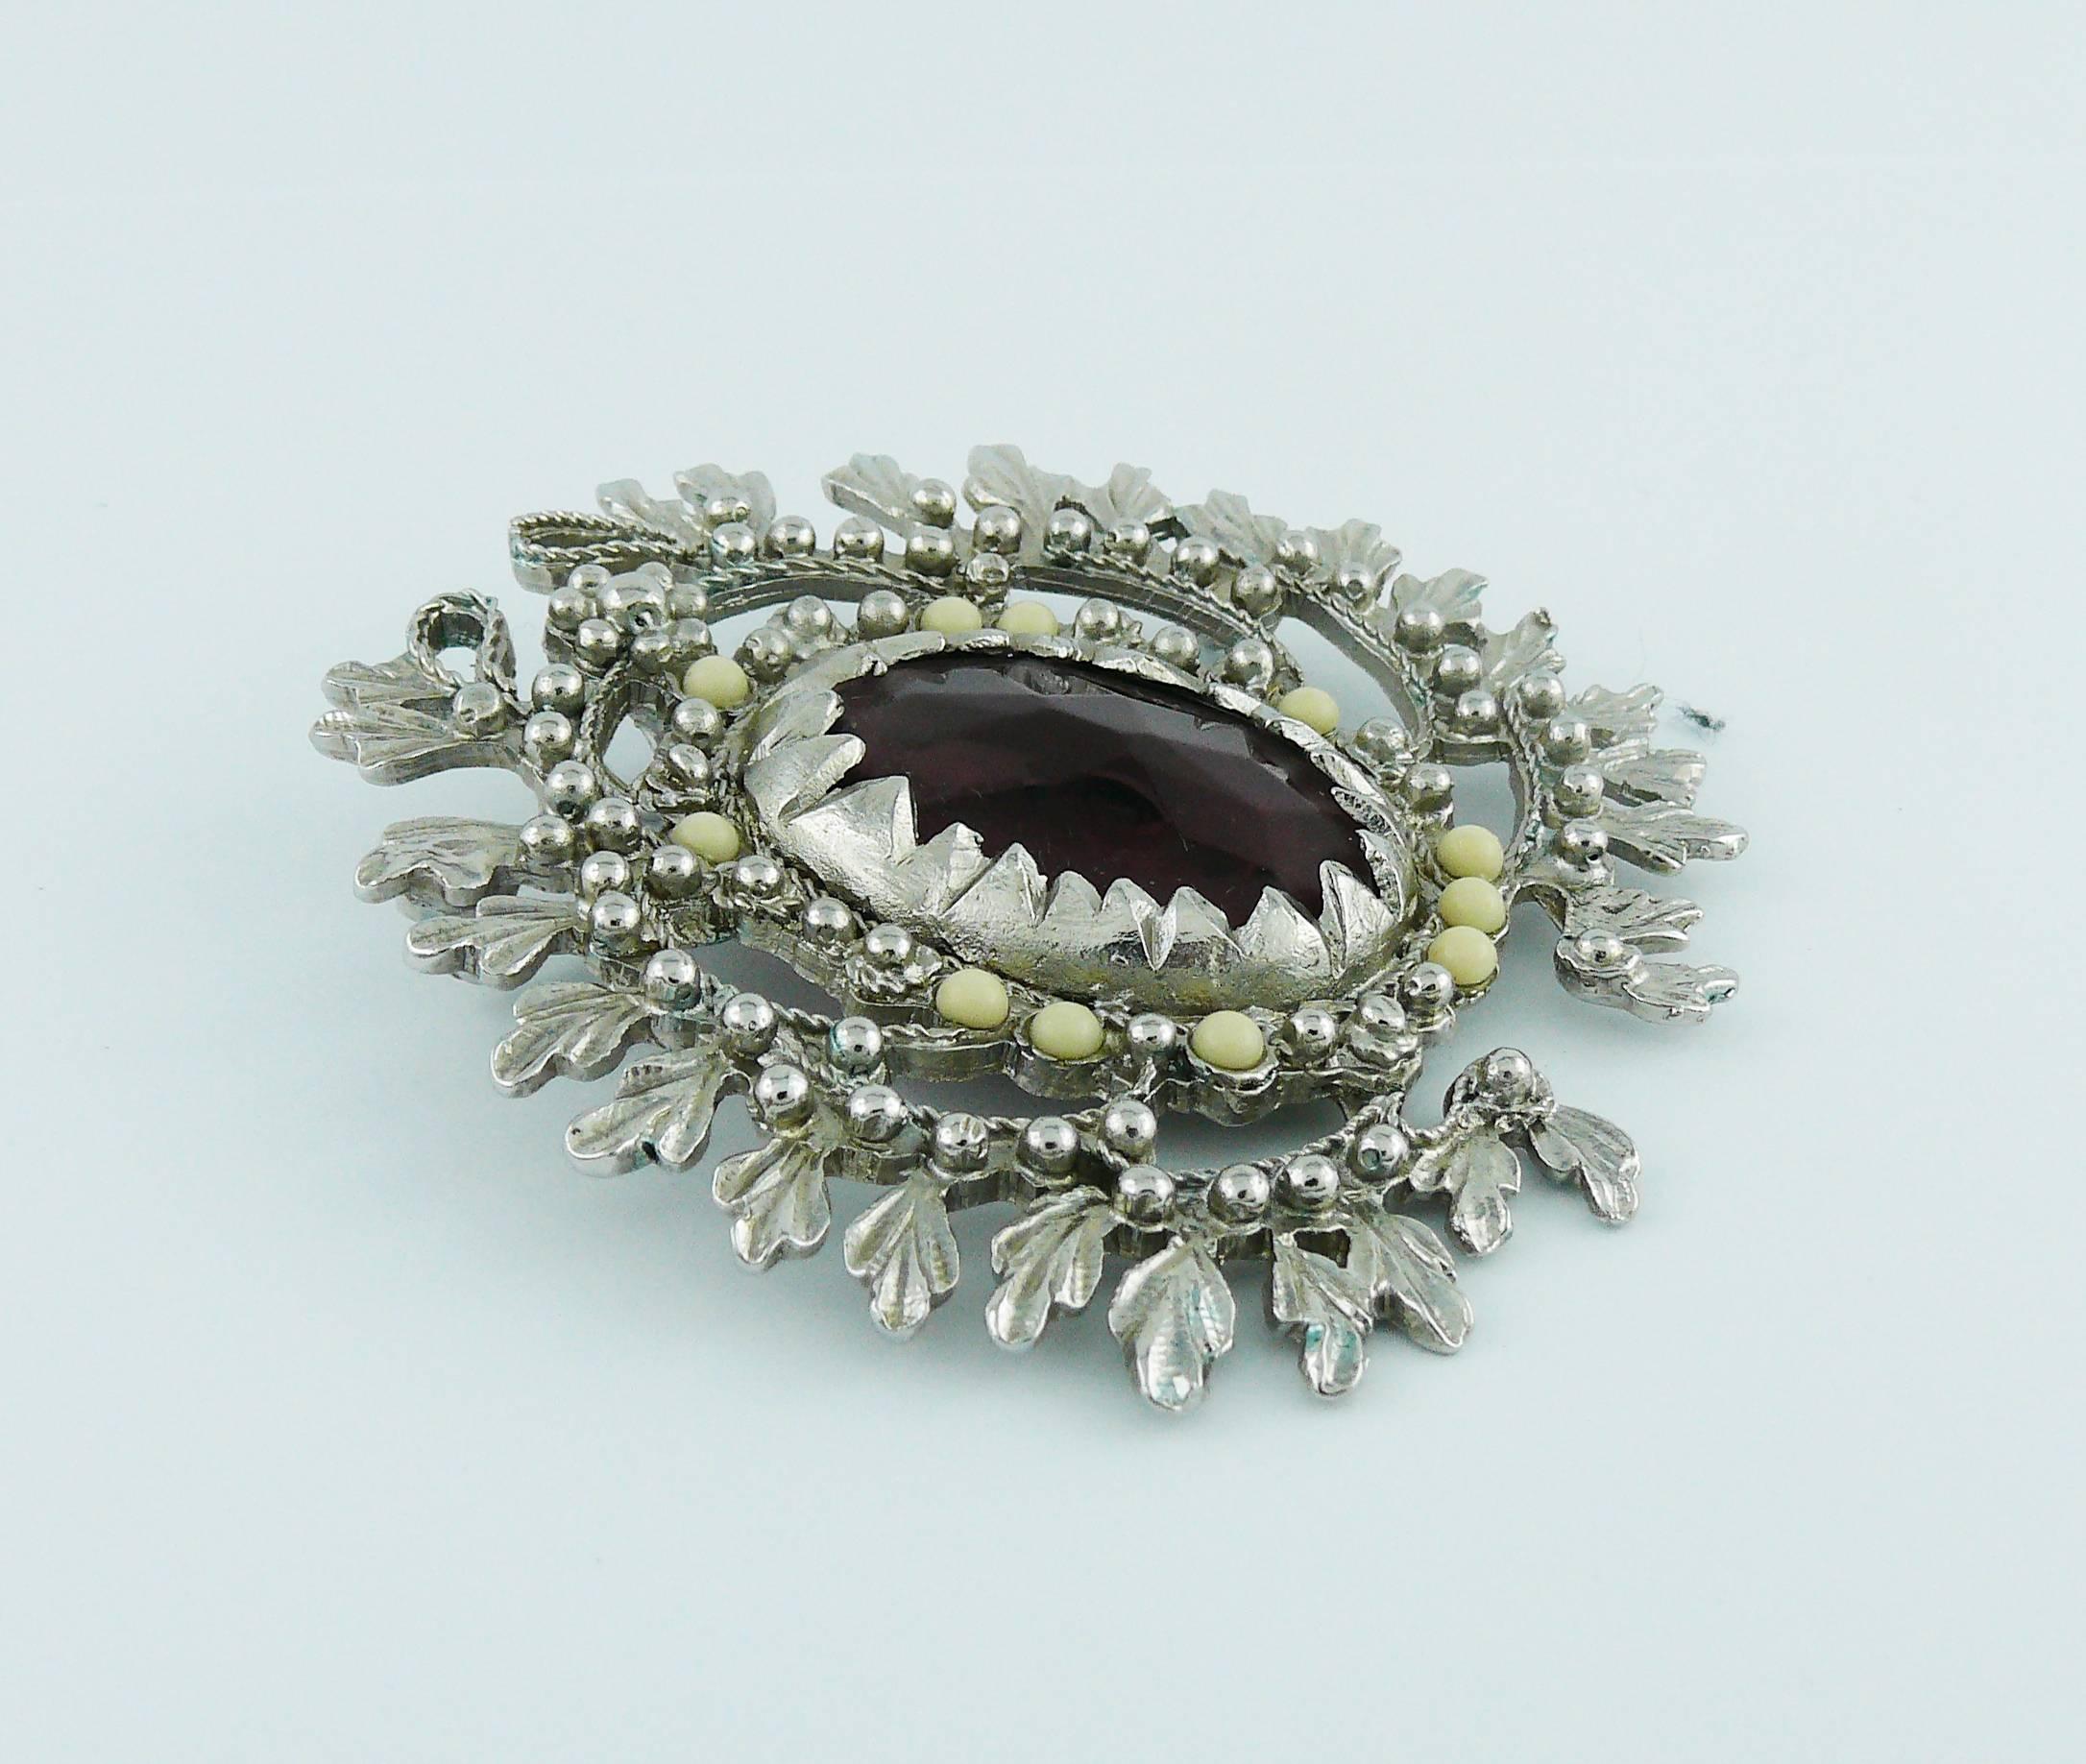 CHRISTIAN LACROIX vintage massive silver toned brooch/pendant featuring a laurel wreath design embellished with faux pearls and a purple faceted glass center.

Can be worn as a pendant.

Marked CHRISTIAN LACROIX CL Made in France.

Indicative